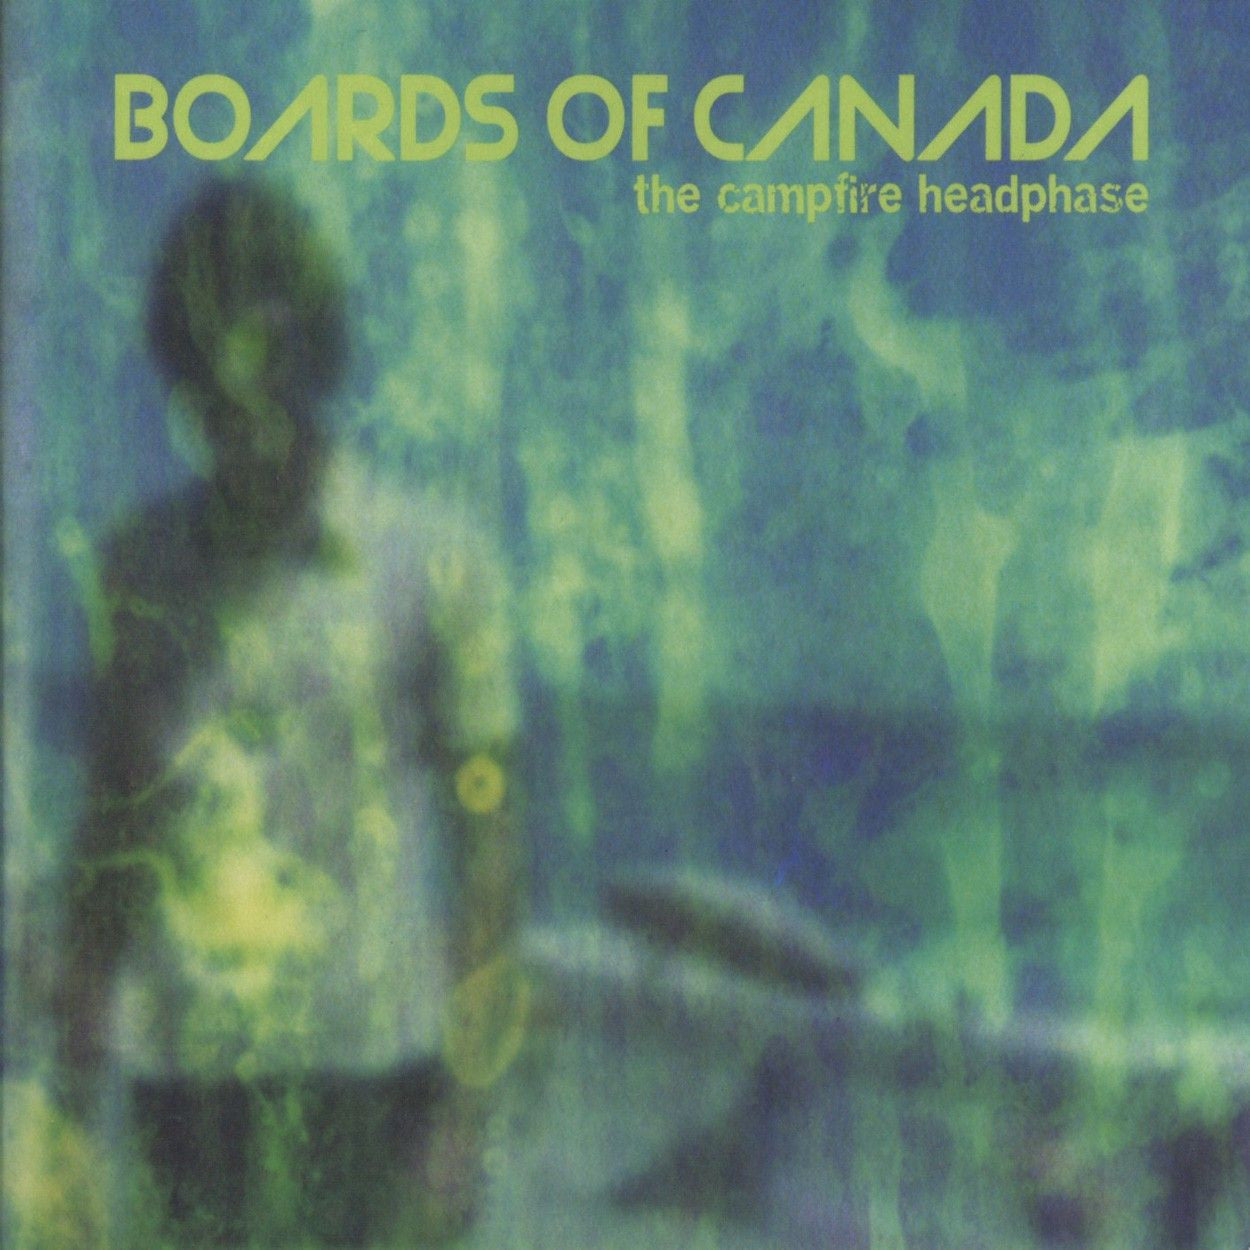 Boards of Canada - The Campfire Headphase (Vinyl 2 LP Record)